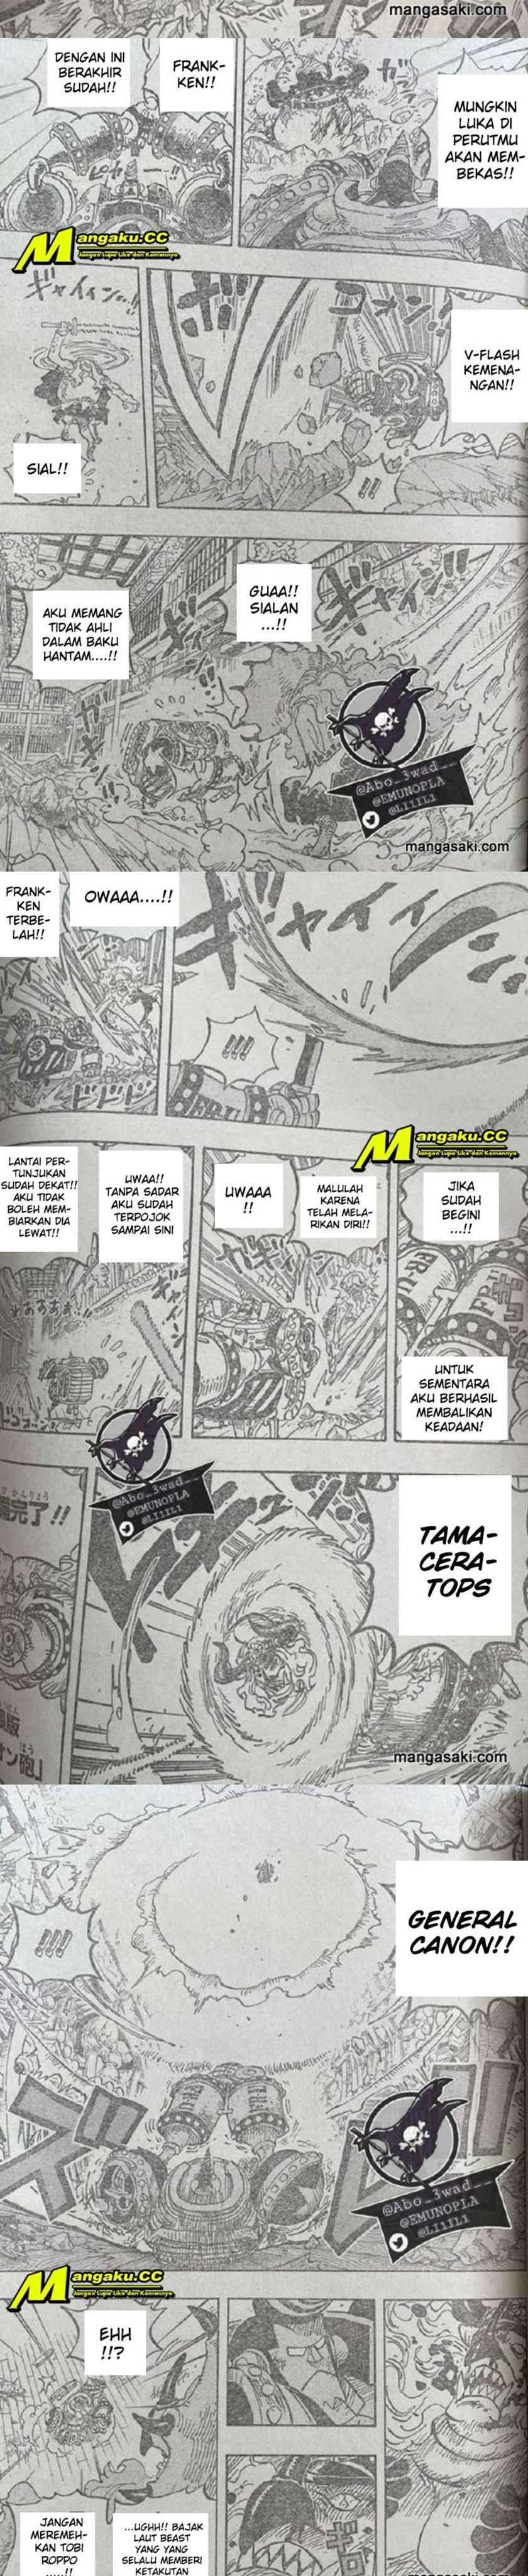 One Piece Chapter 1019 Lq - 37